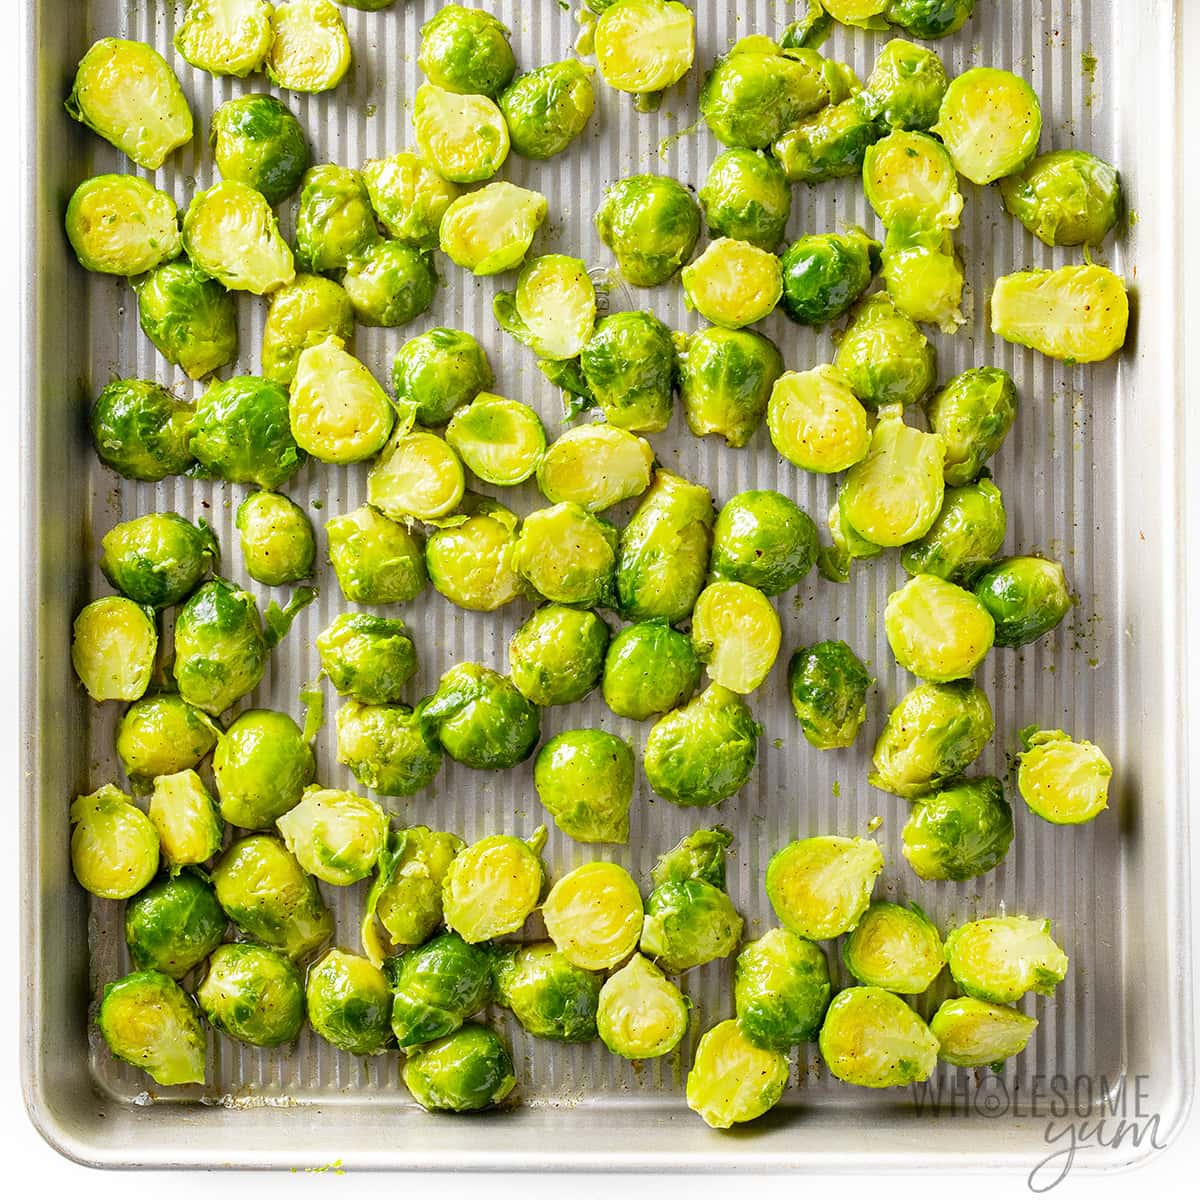 Brussels sprouts on a sheet pan, cut in half.